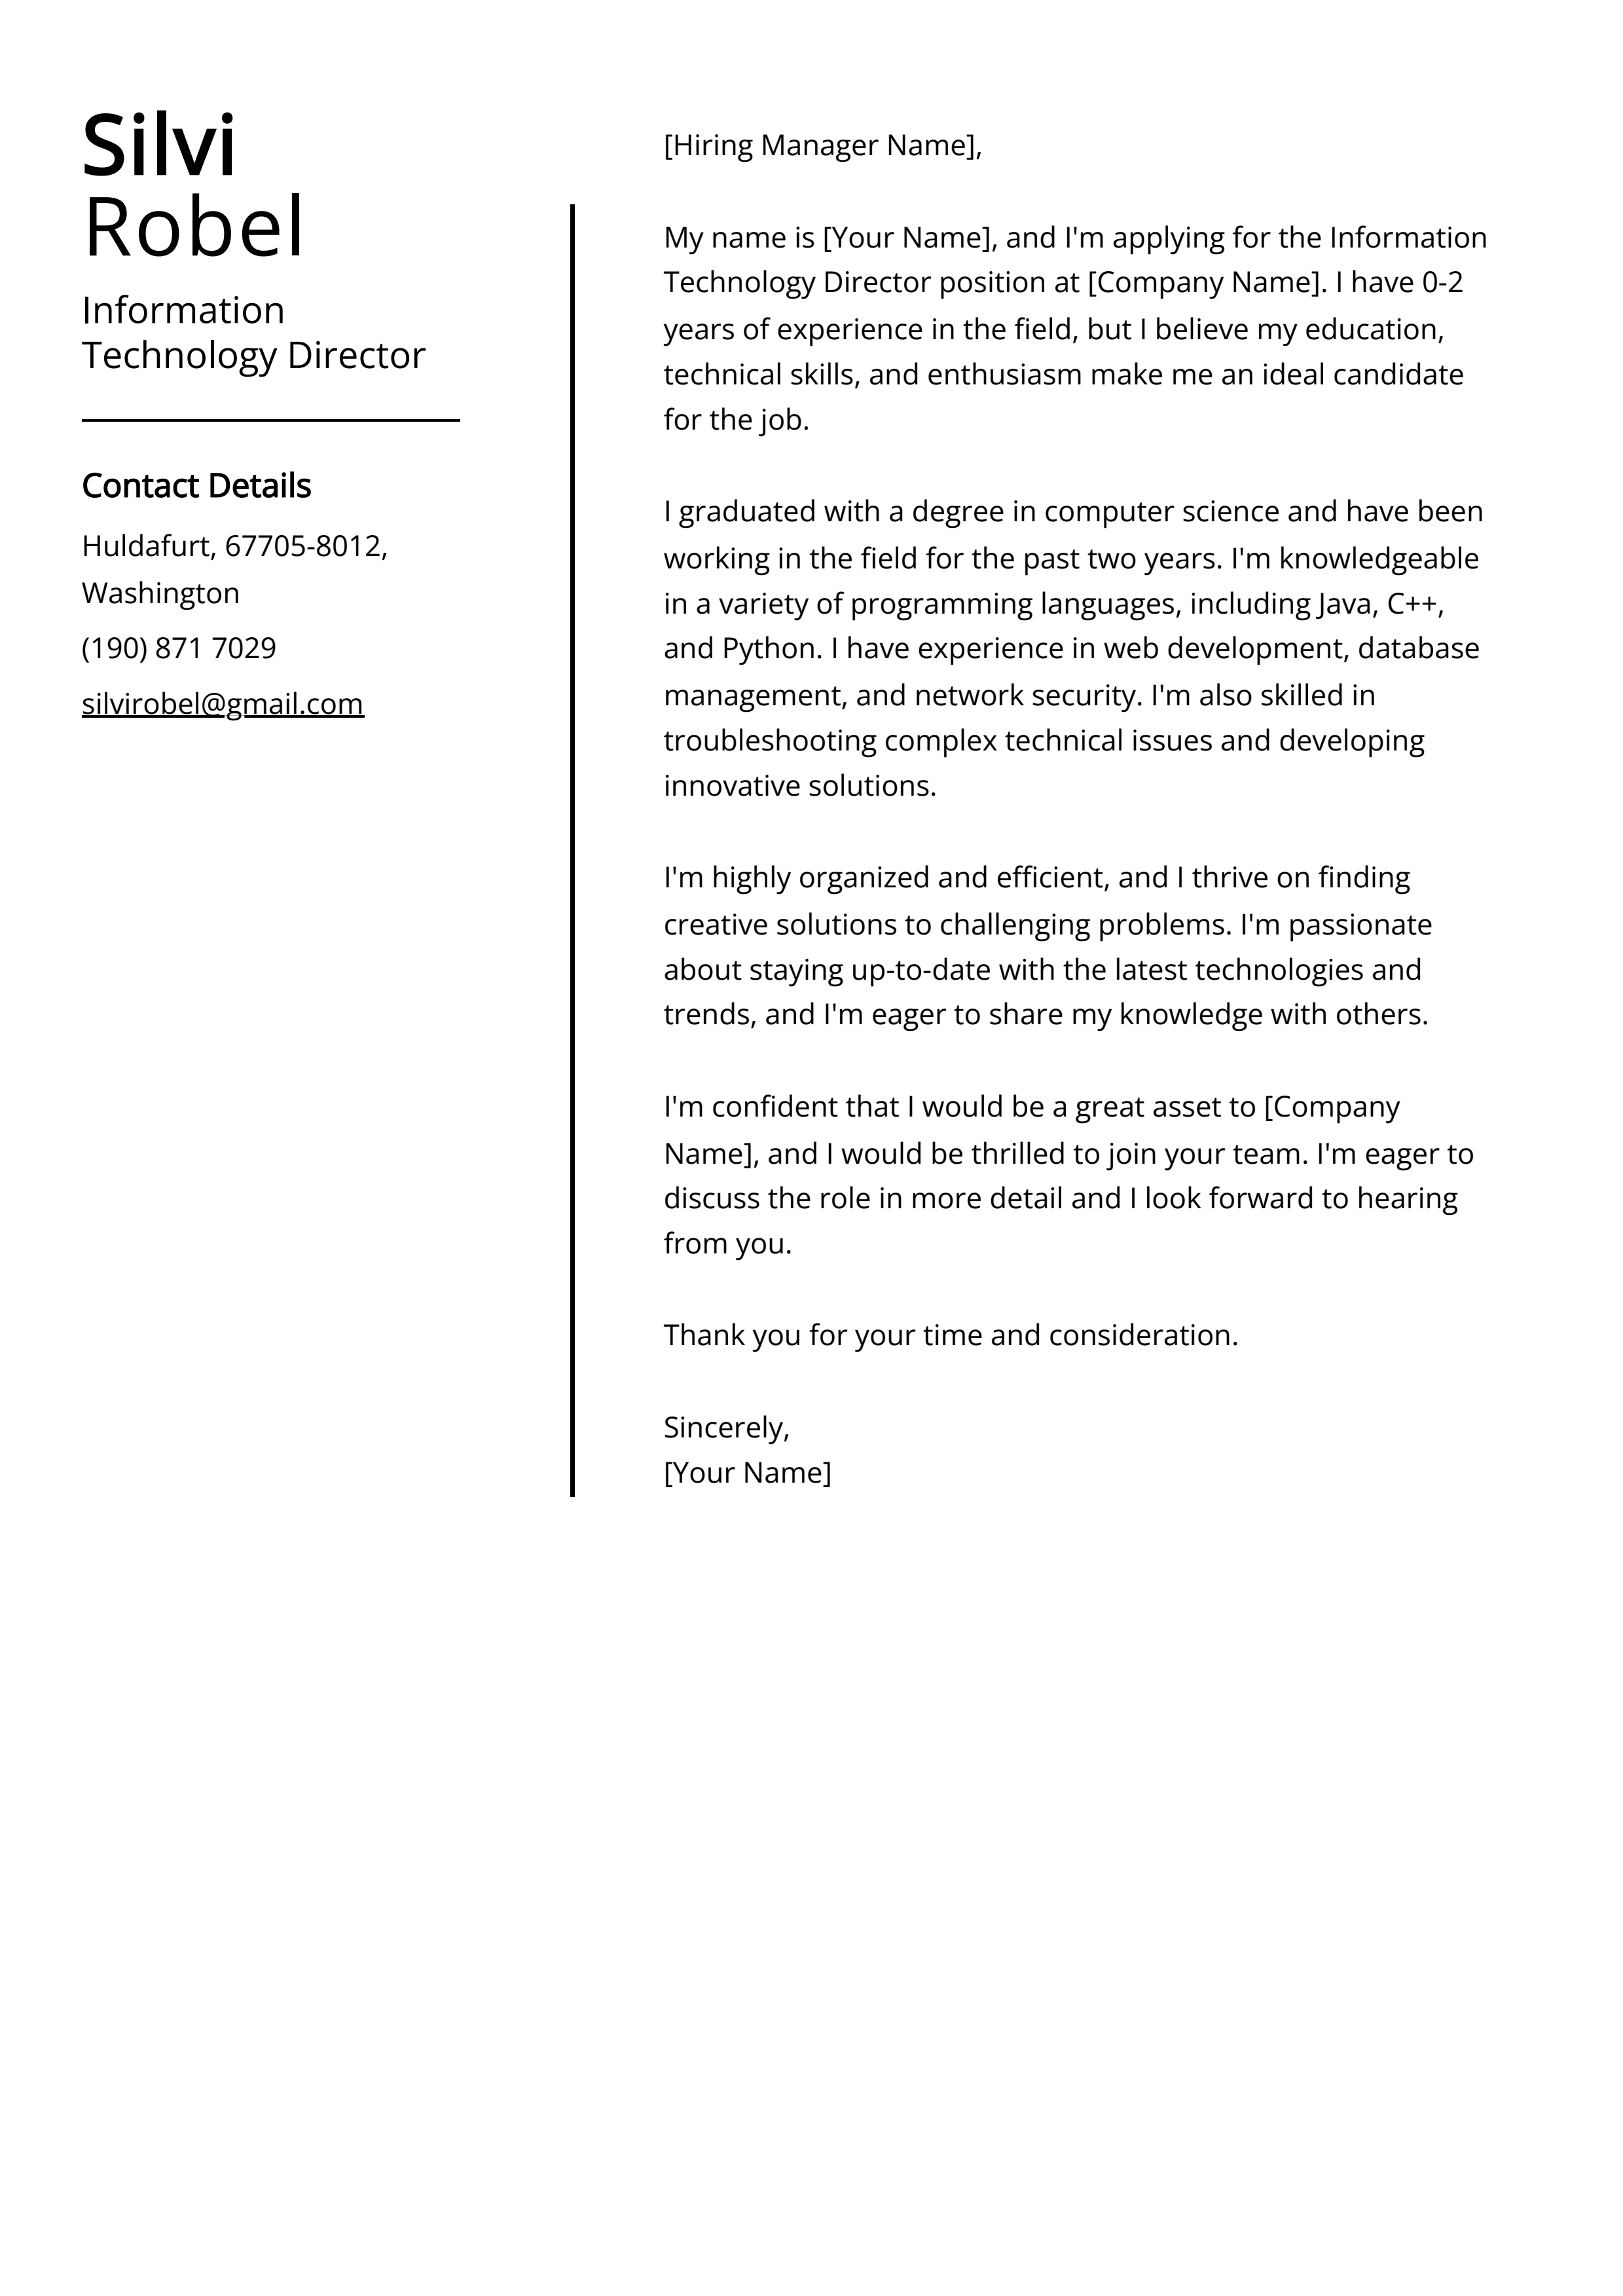 Information Technology Director Cover Letter Example